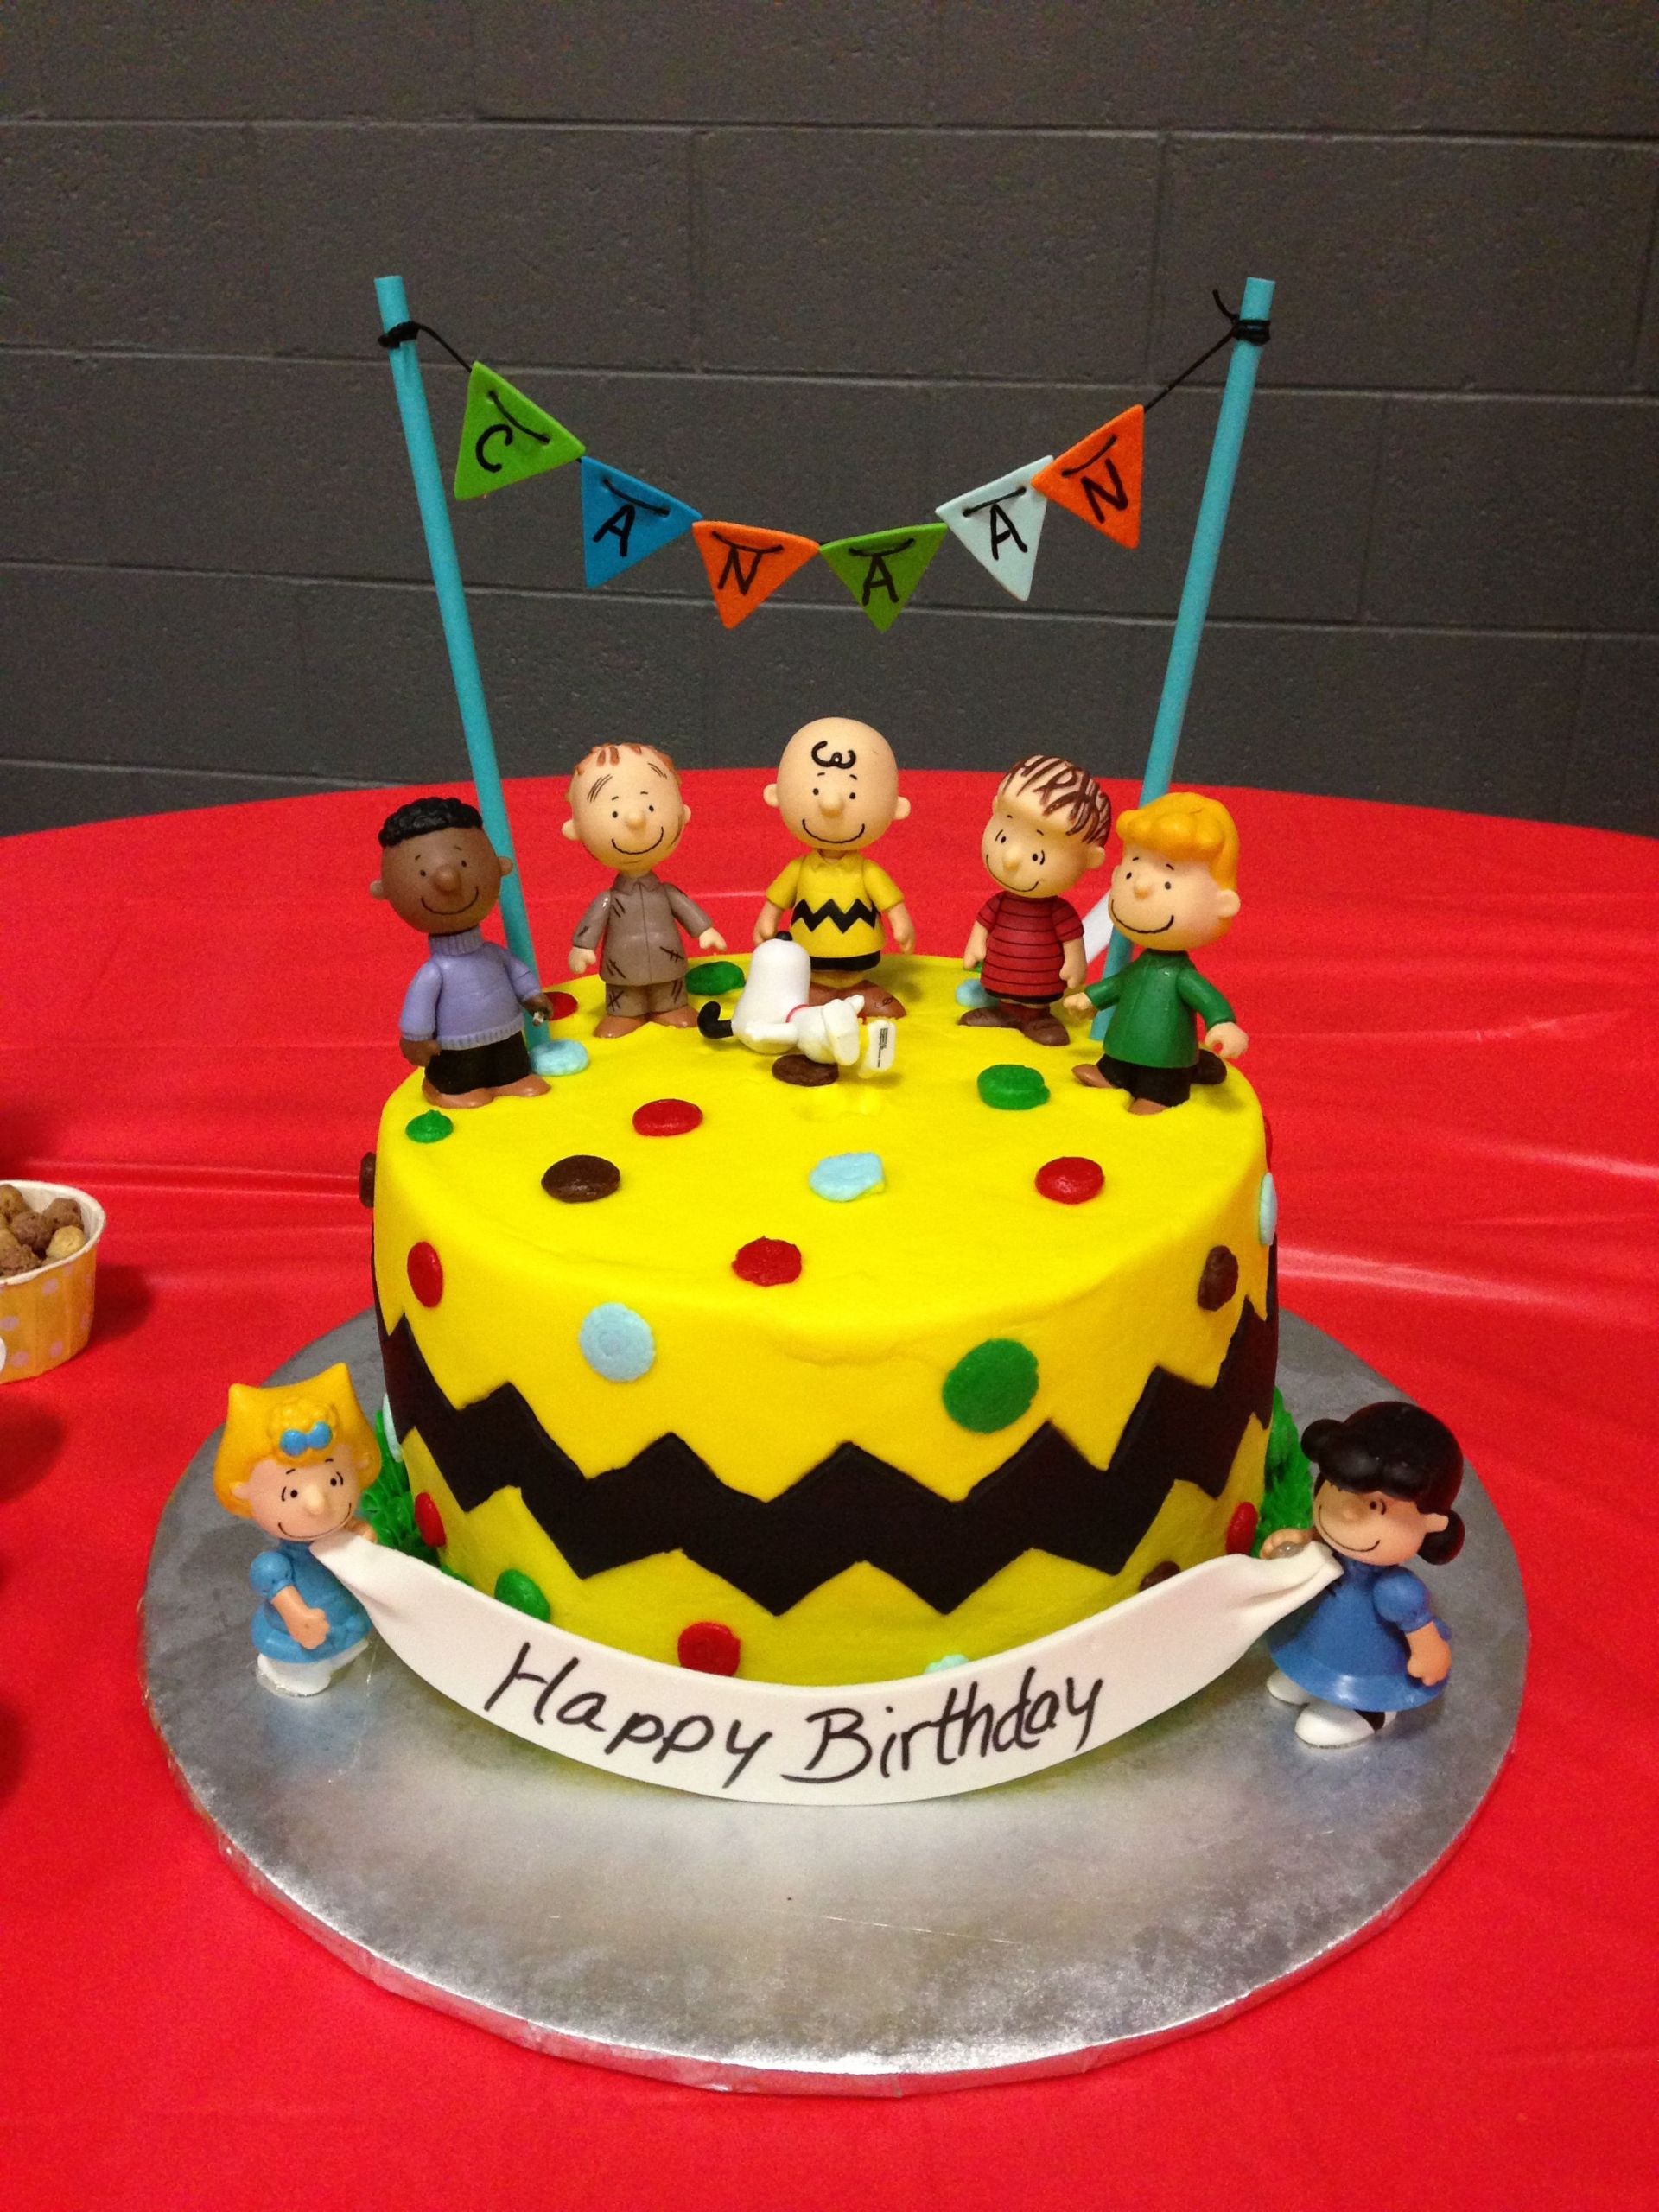 Charlie Brown Birthday Cake
 Great cake Wish I had noticed that Snoopy had fallen over